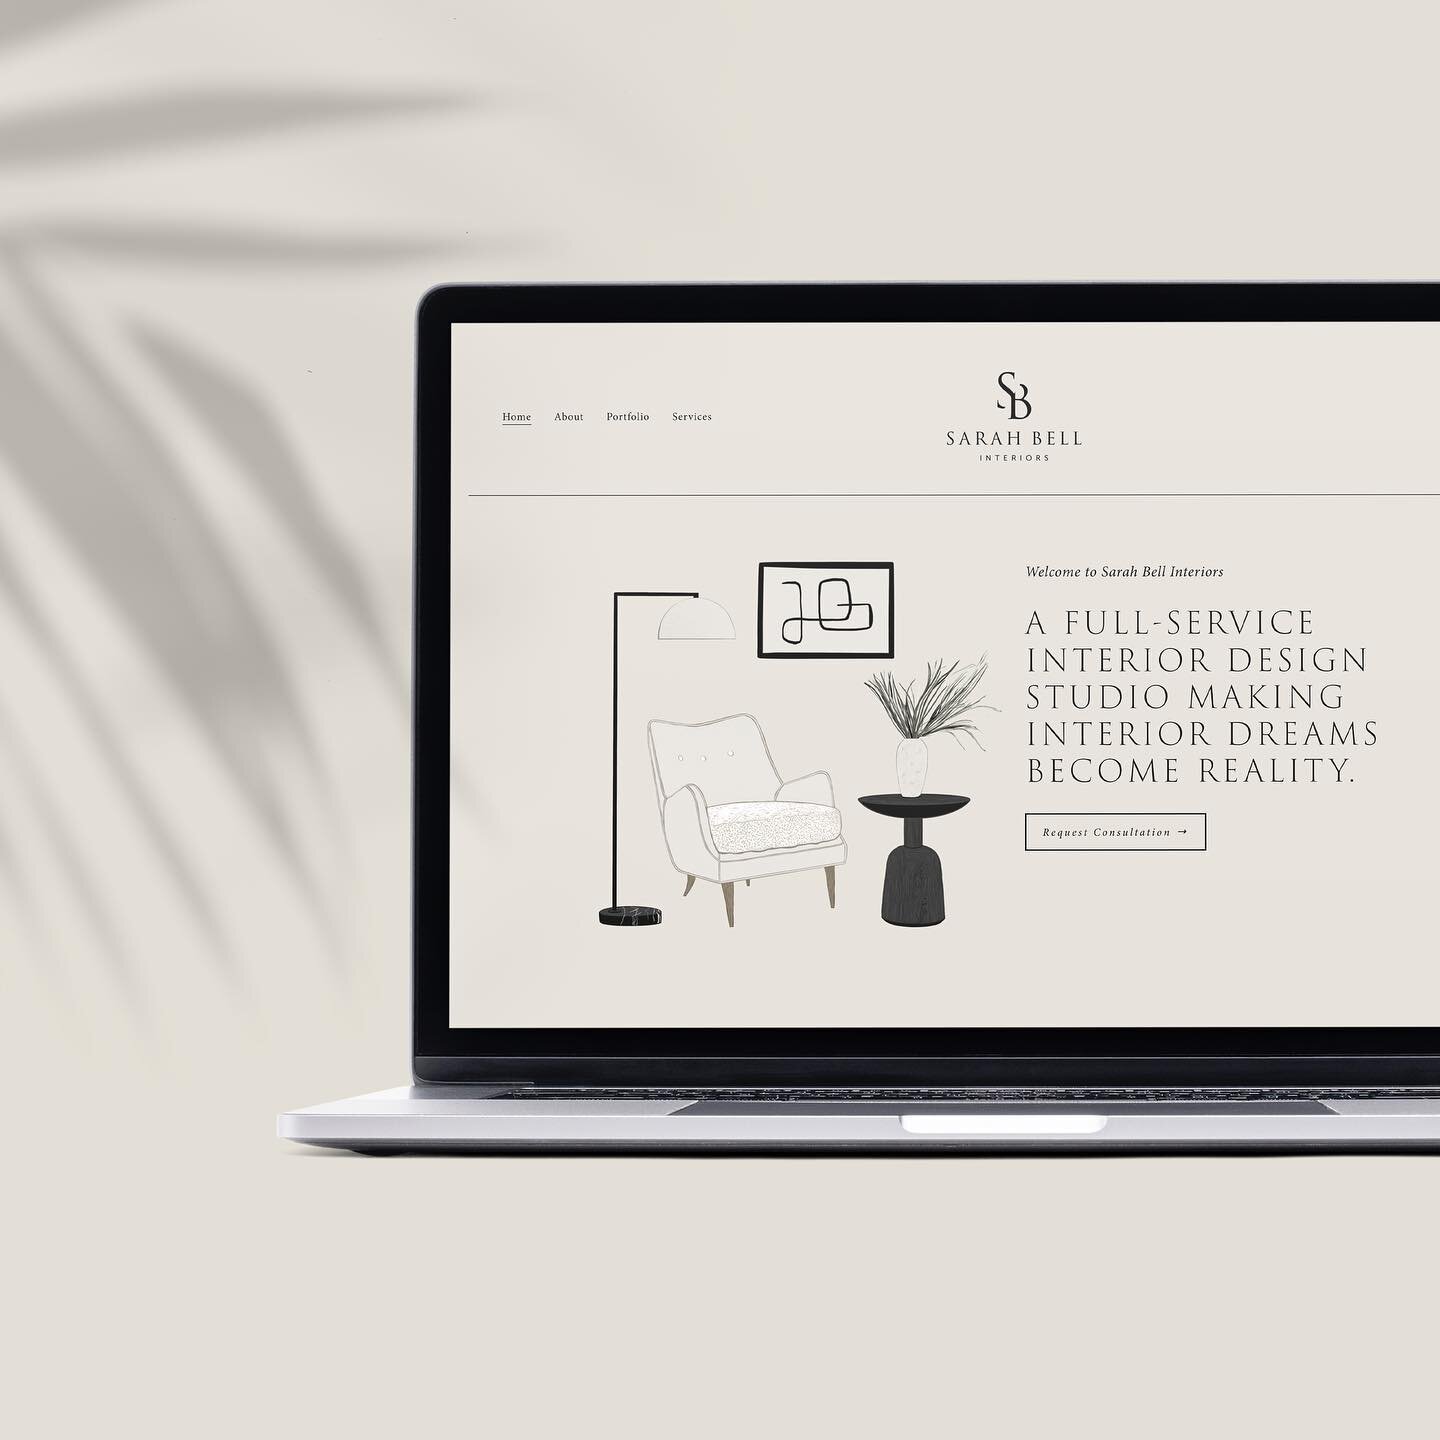 A little website redesign #wip for @sarahbellinteriors following a rebrand! 🪴 

Can&rsquo;t wait to share the final outcome 👏🏻

.
.
.

Computer psd created by rawpixel.com - www.freepik.com

#anneliesezakdesign #graphicdesign #graphicdesigner #gra